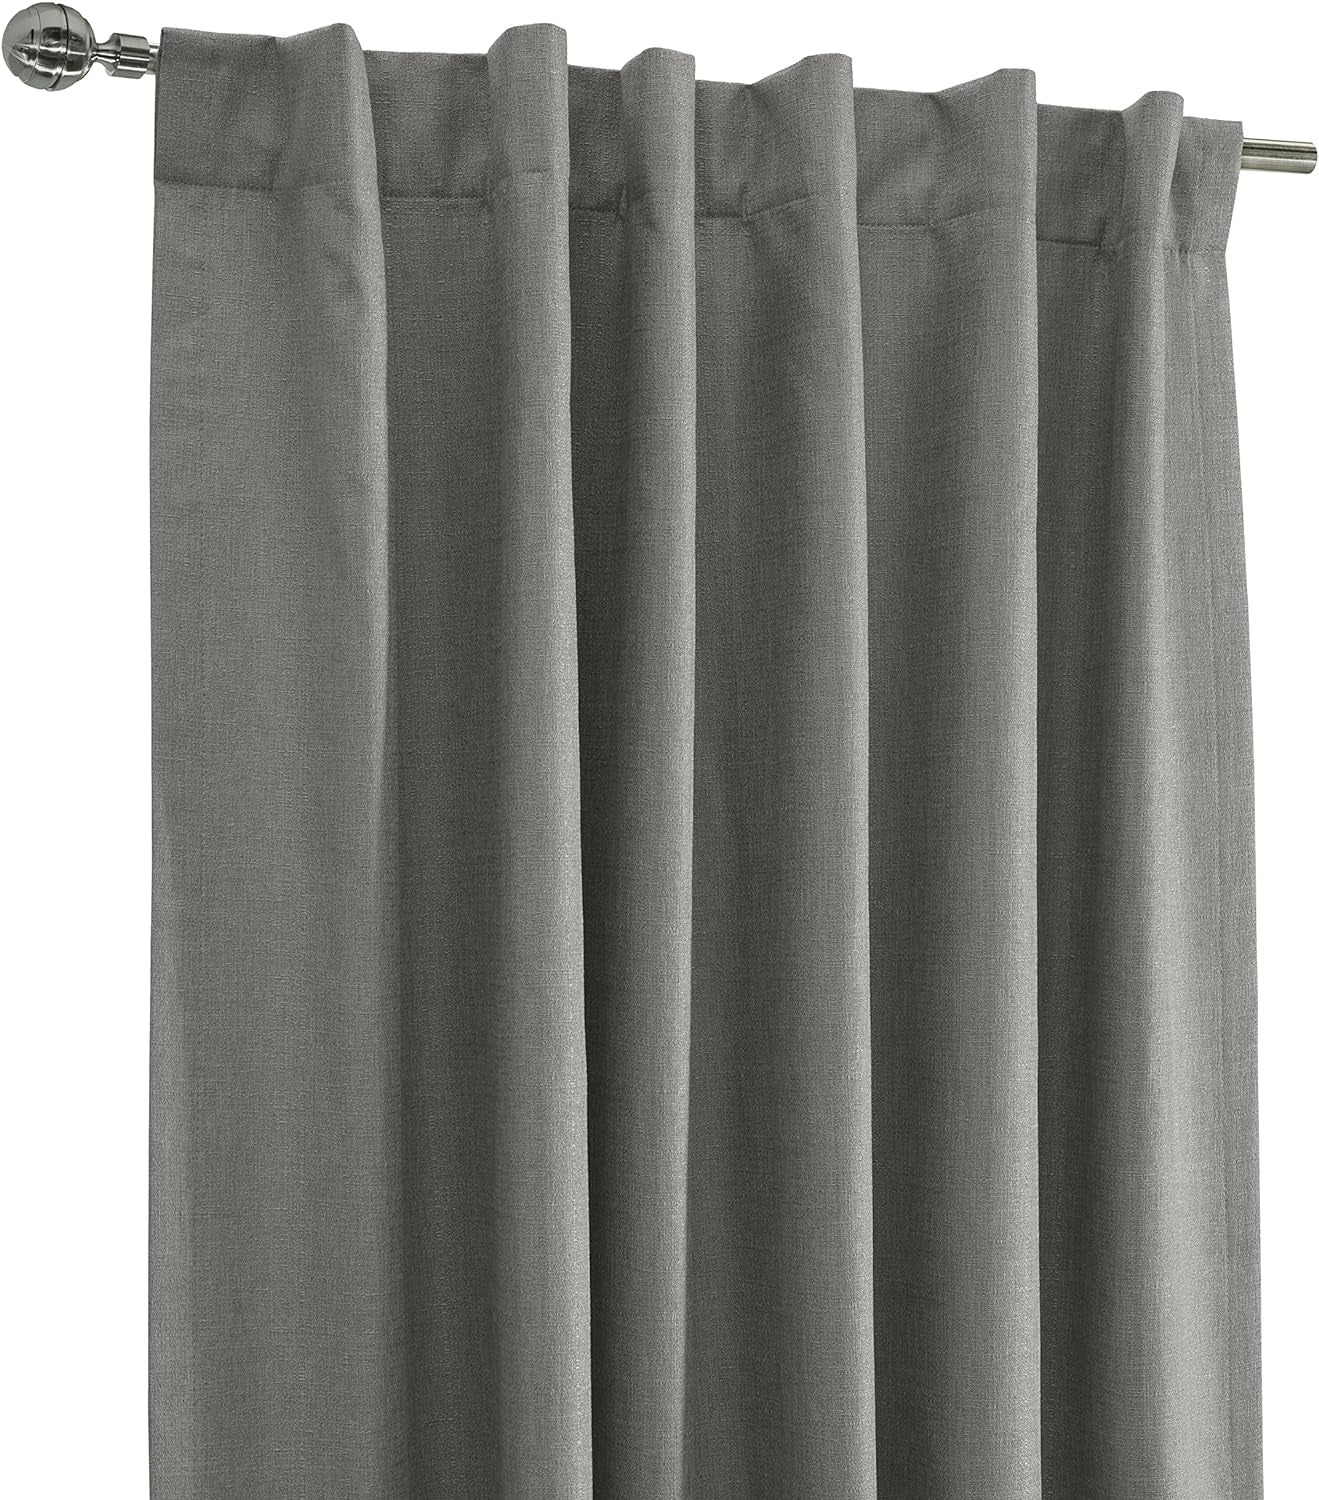 Loft Living Barry Total Blackout Textured Dual Header Curtain Panel 52" X 95" in Silver  Commonwealth Home Fashions   